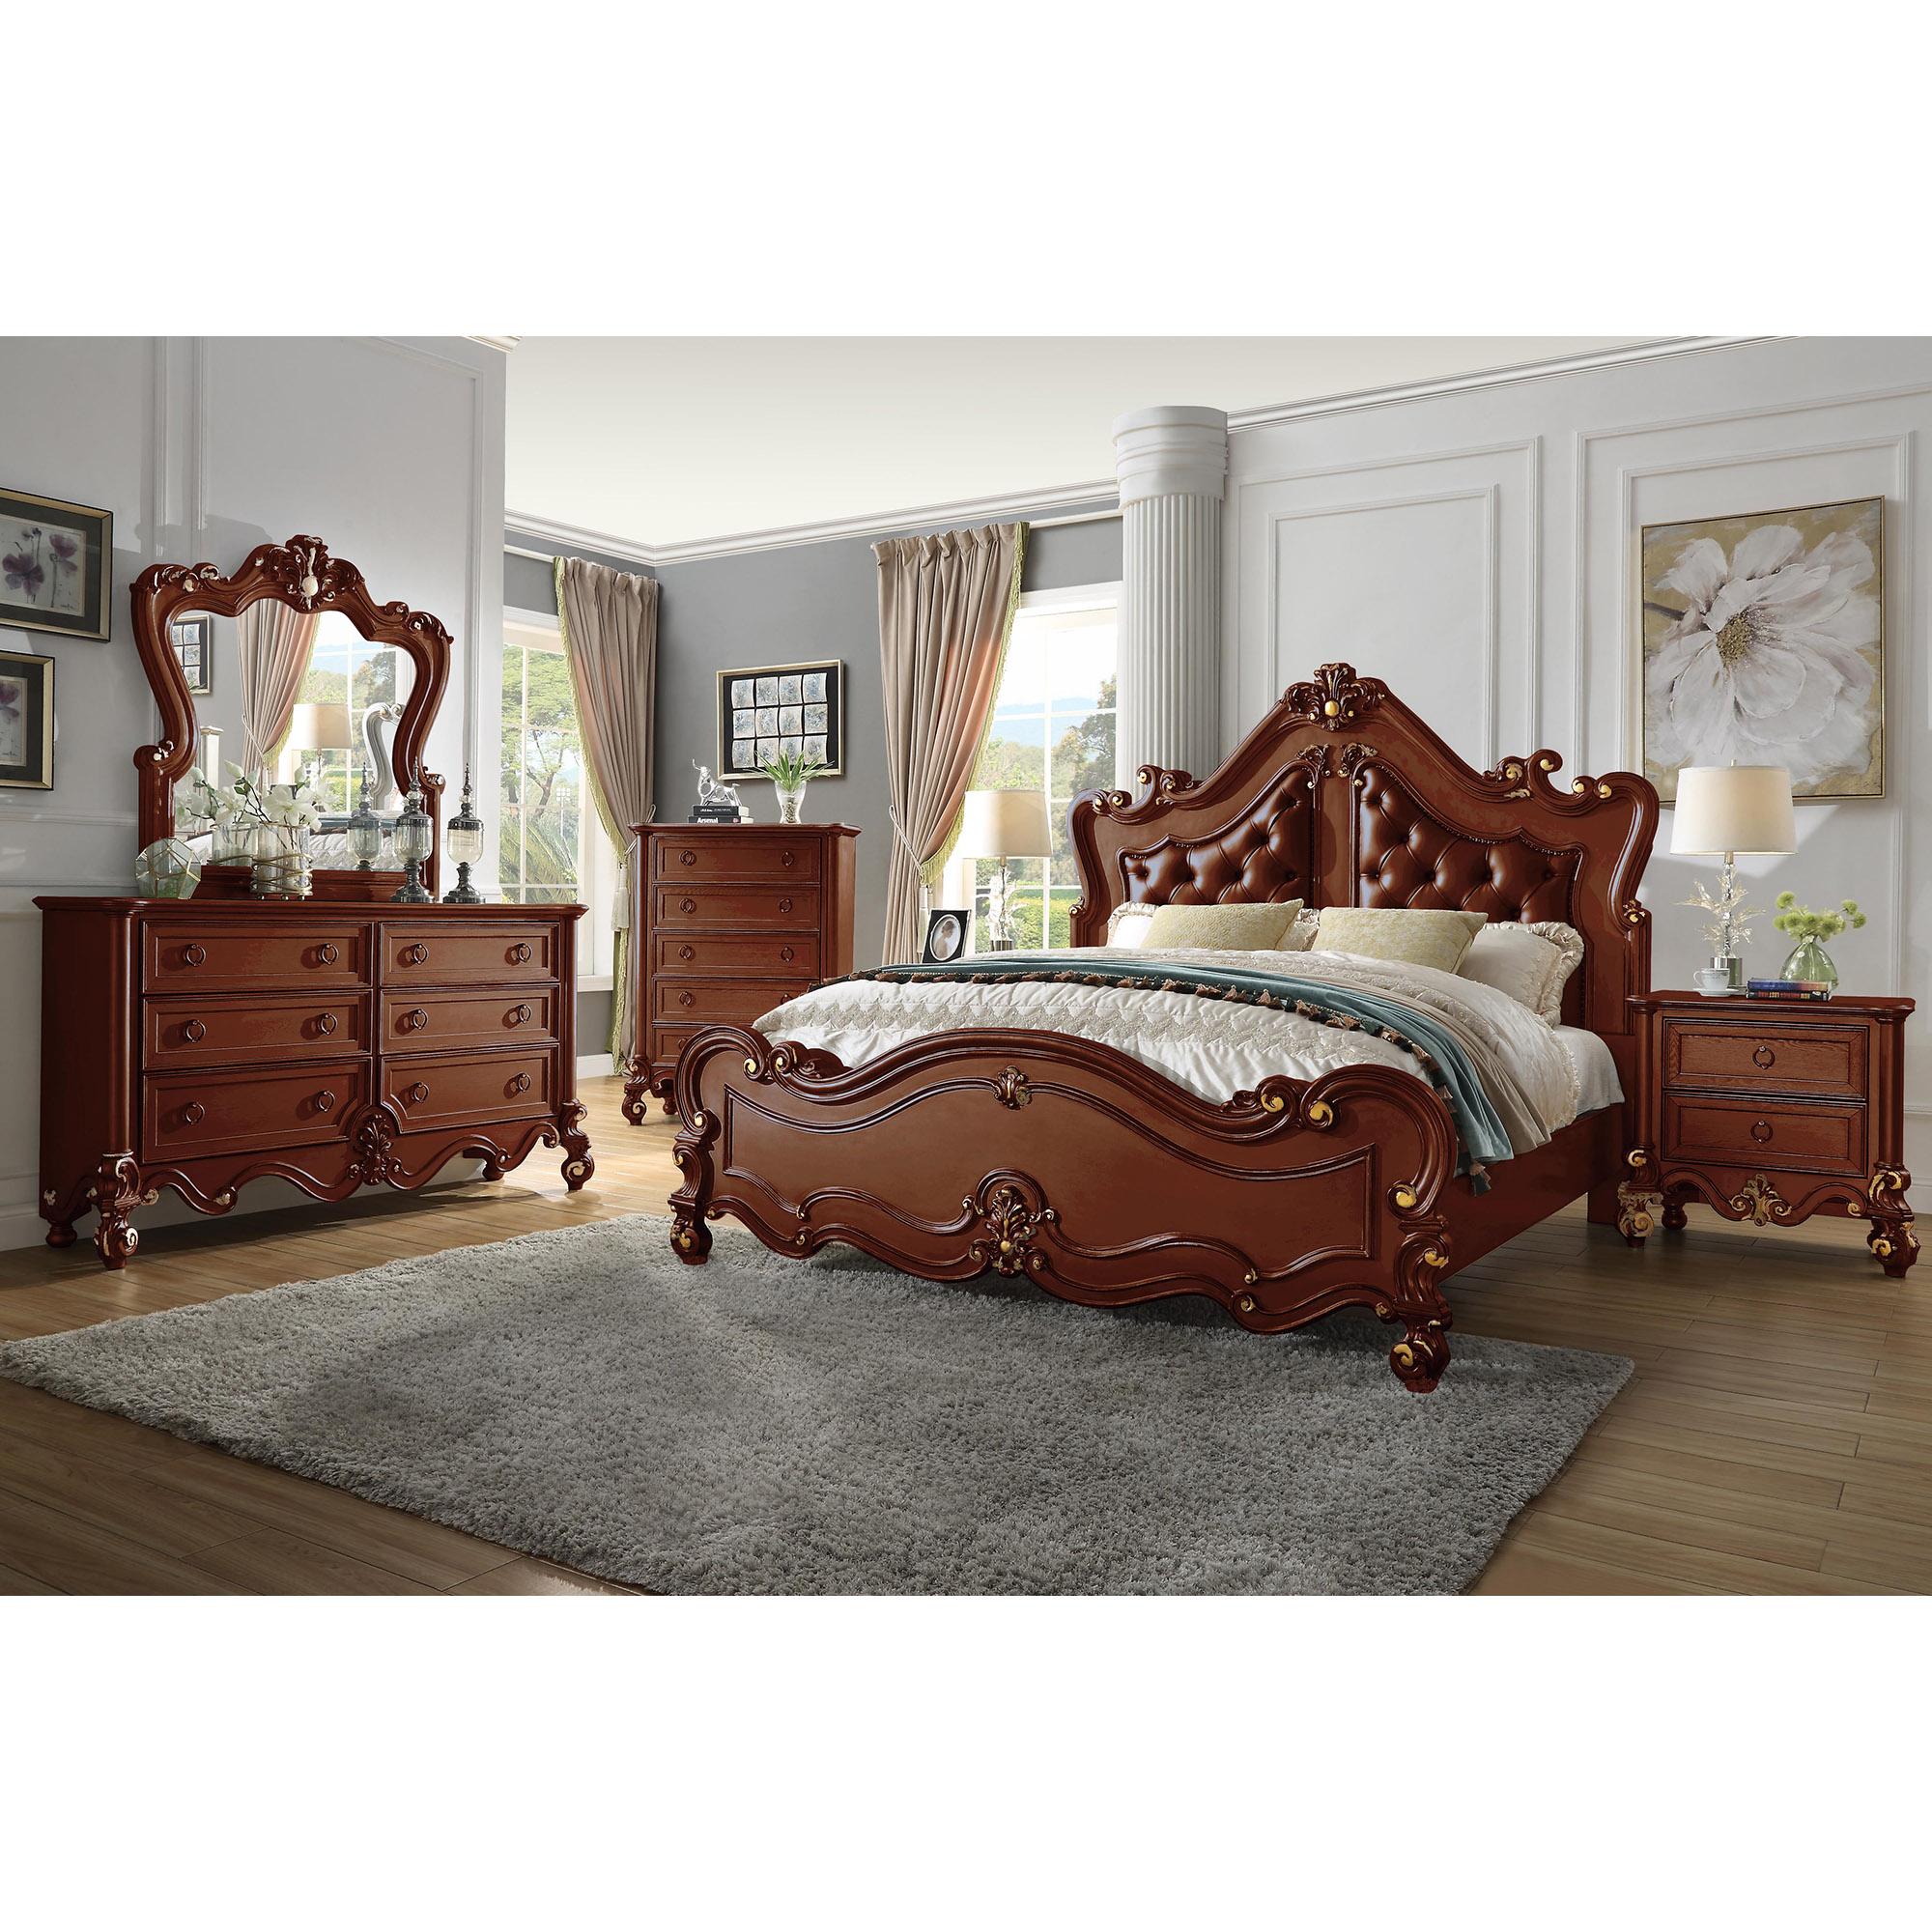 Traditional Panel Bedroom Set HD-999 CHERRY HD-EK999C-4PC-BEDROOM in Cherry, Gold Leather